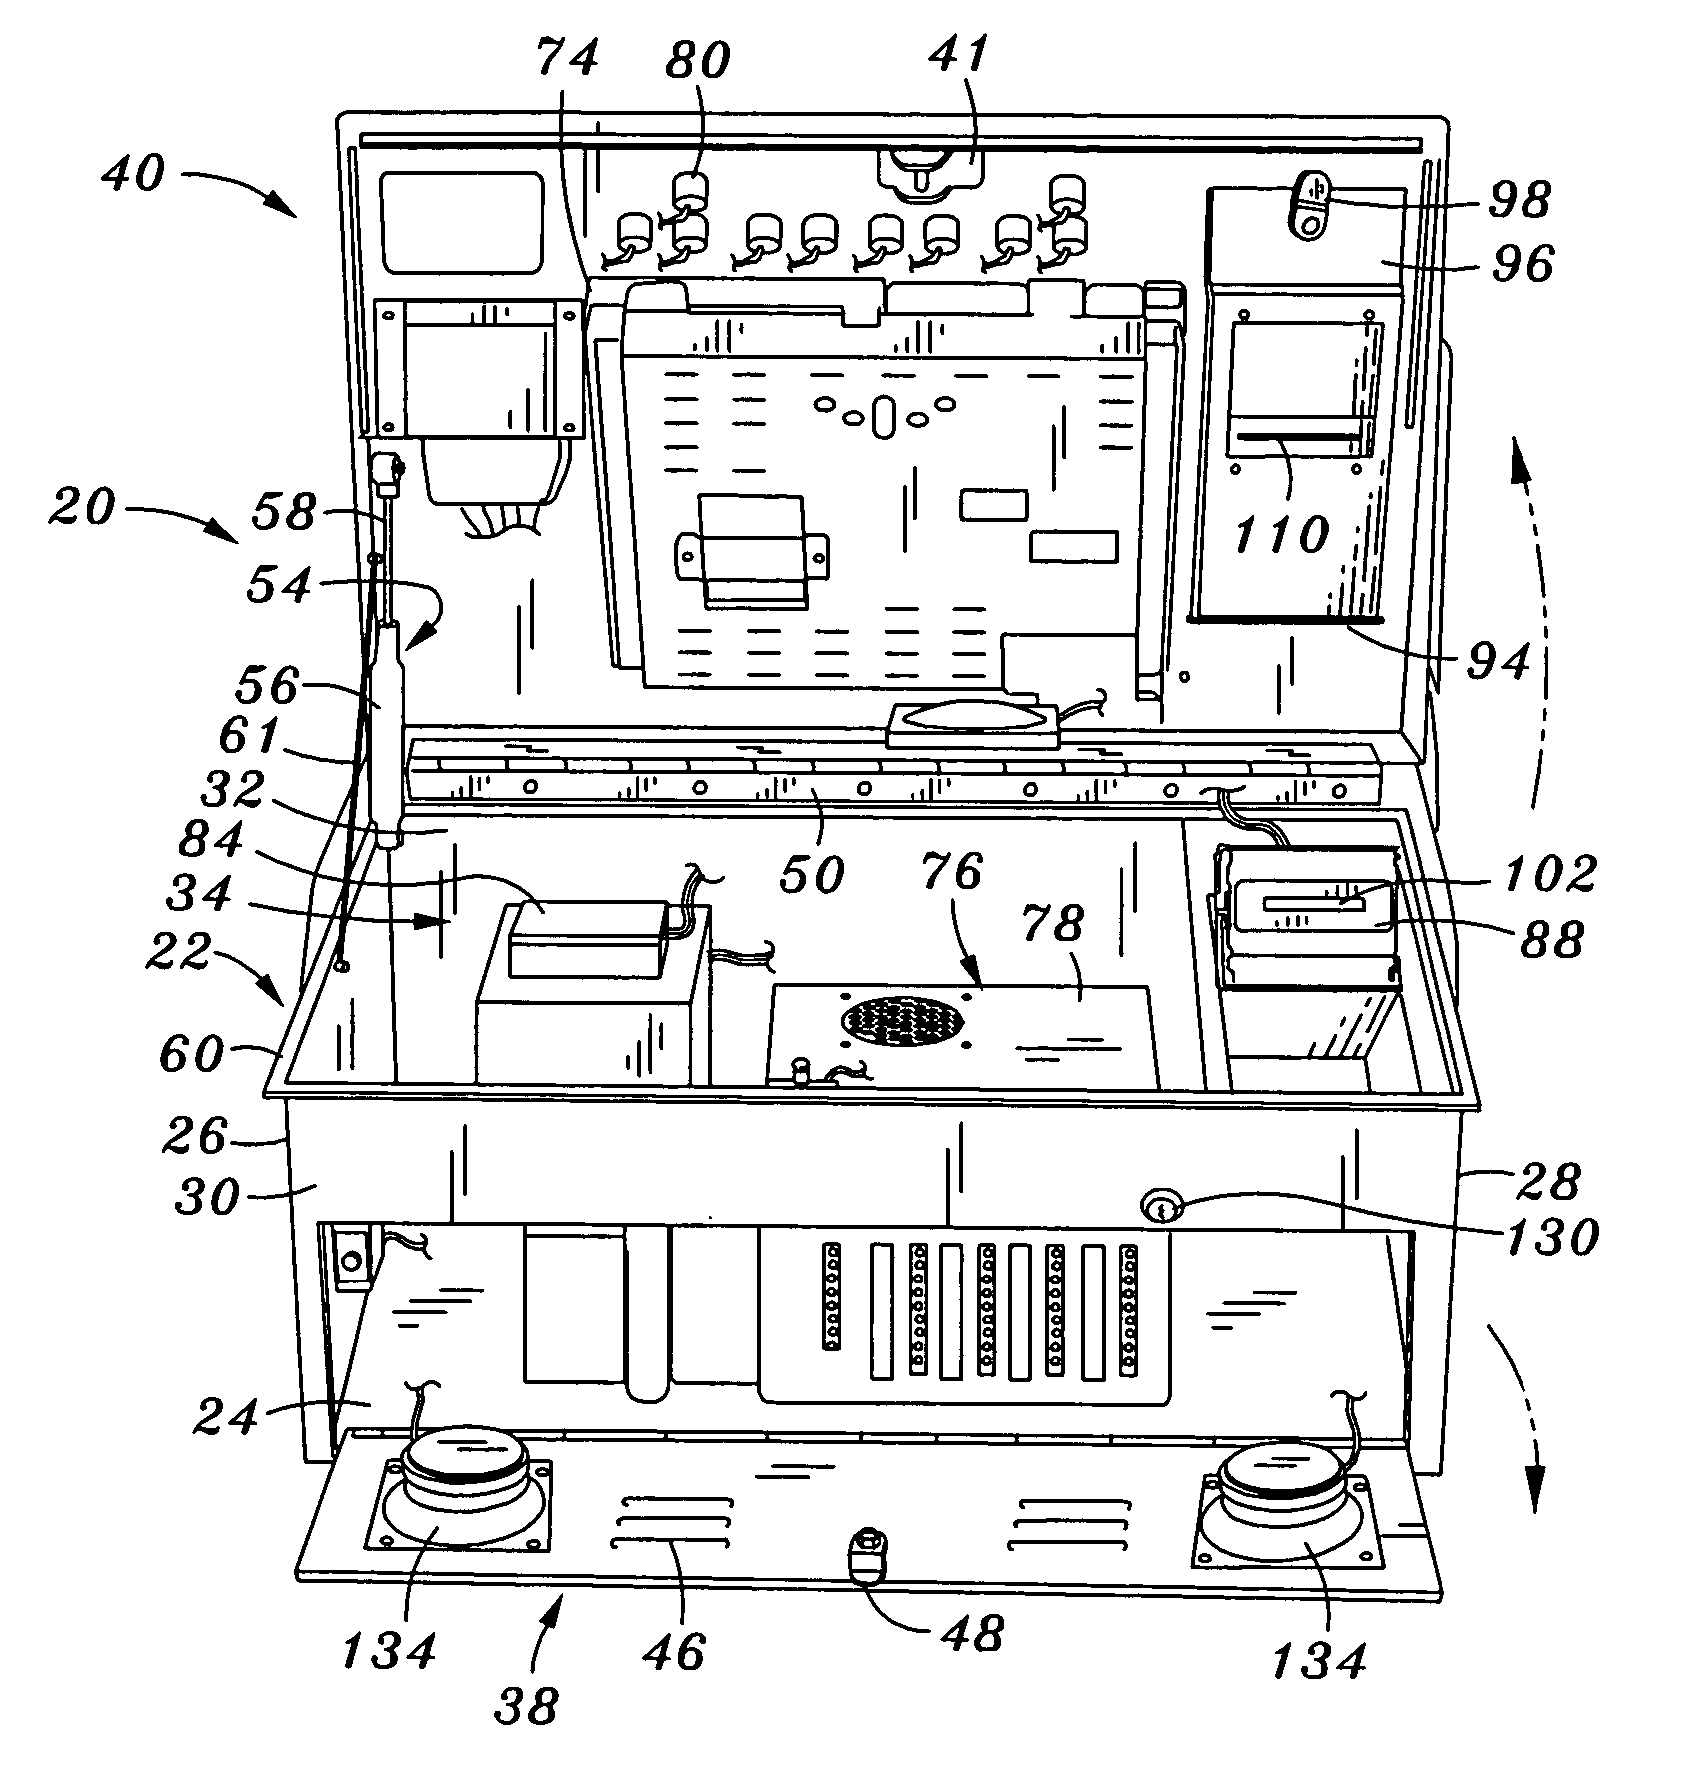 Gaming unit including currency container locking mechanism